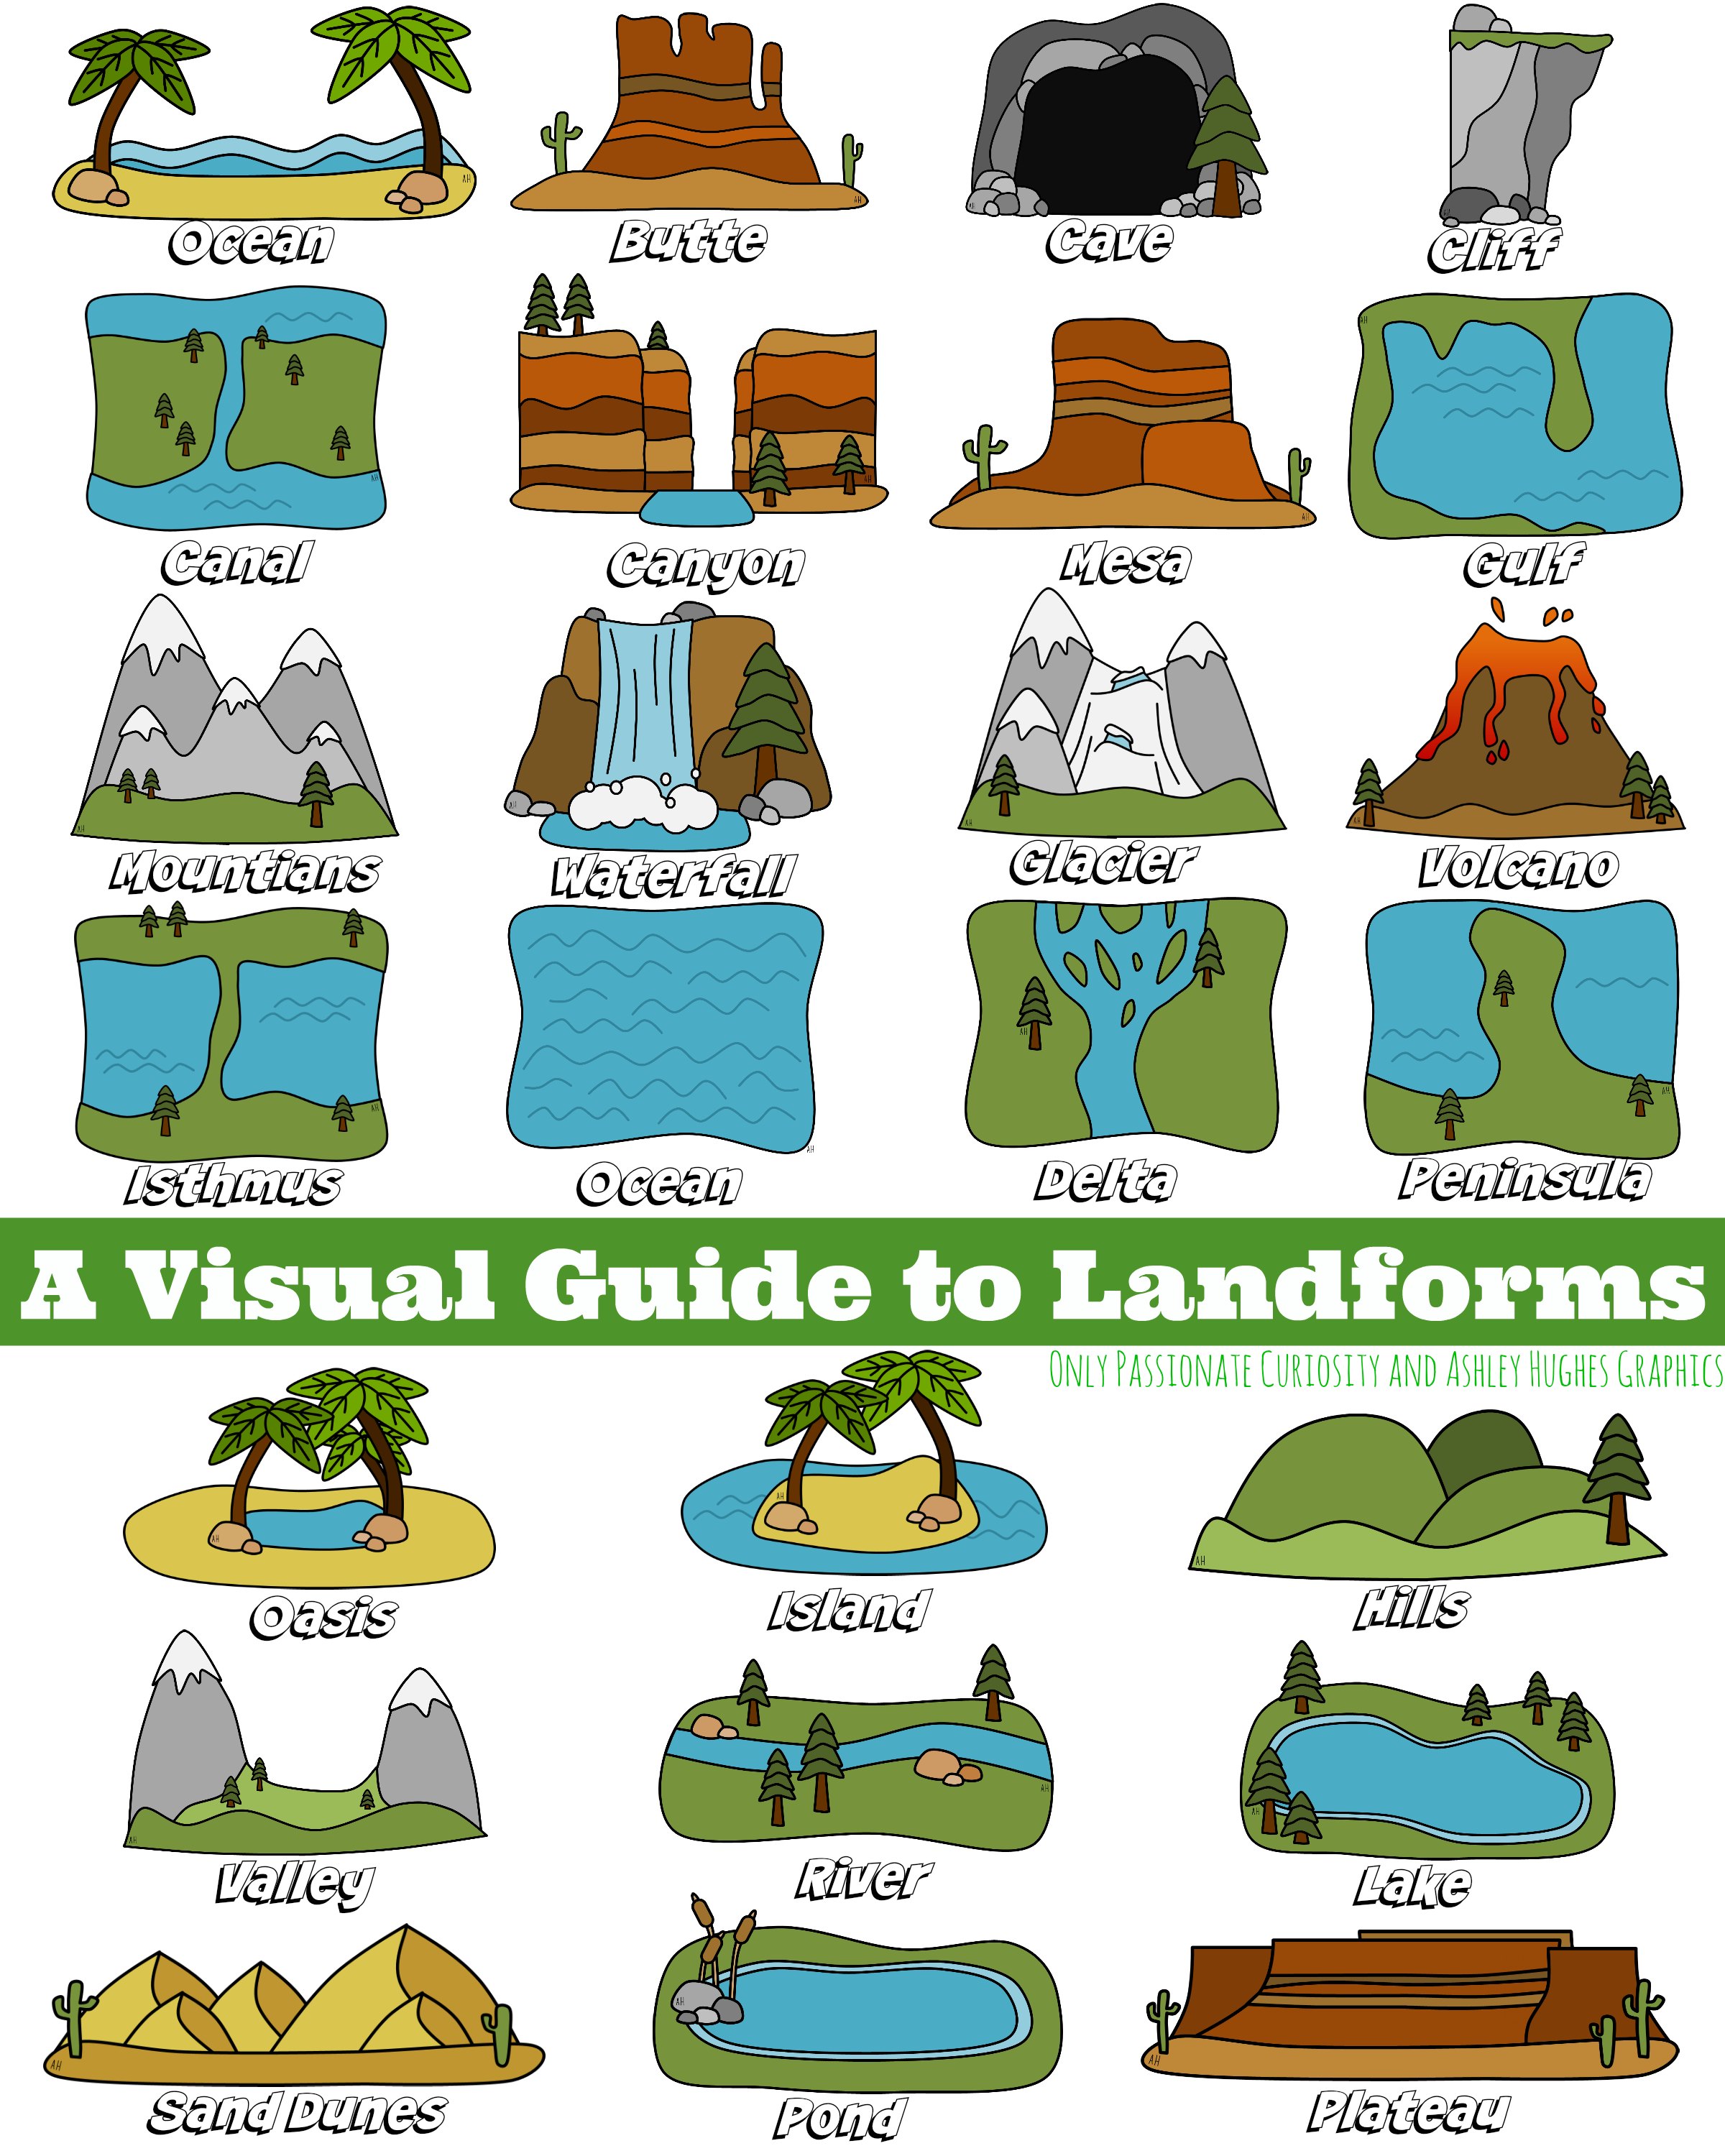 Landforms Visual Guide Only Passionate Curiosity